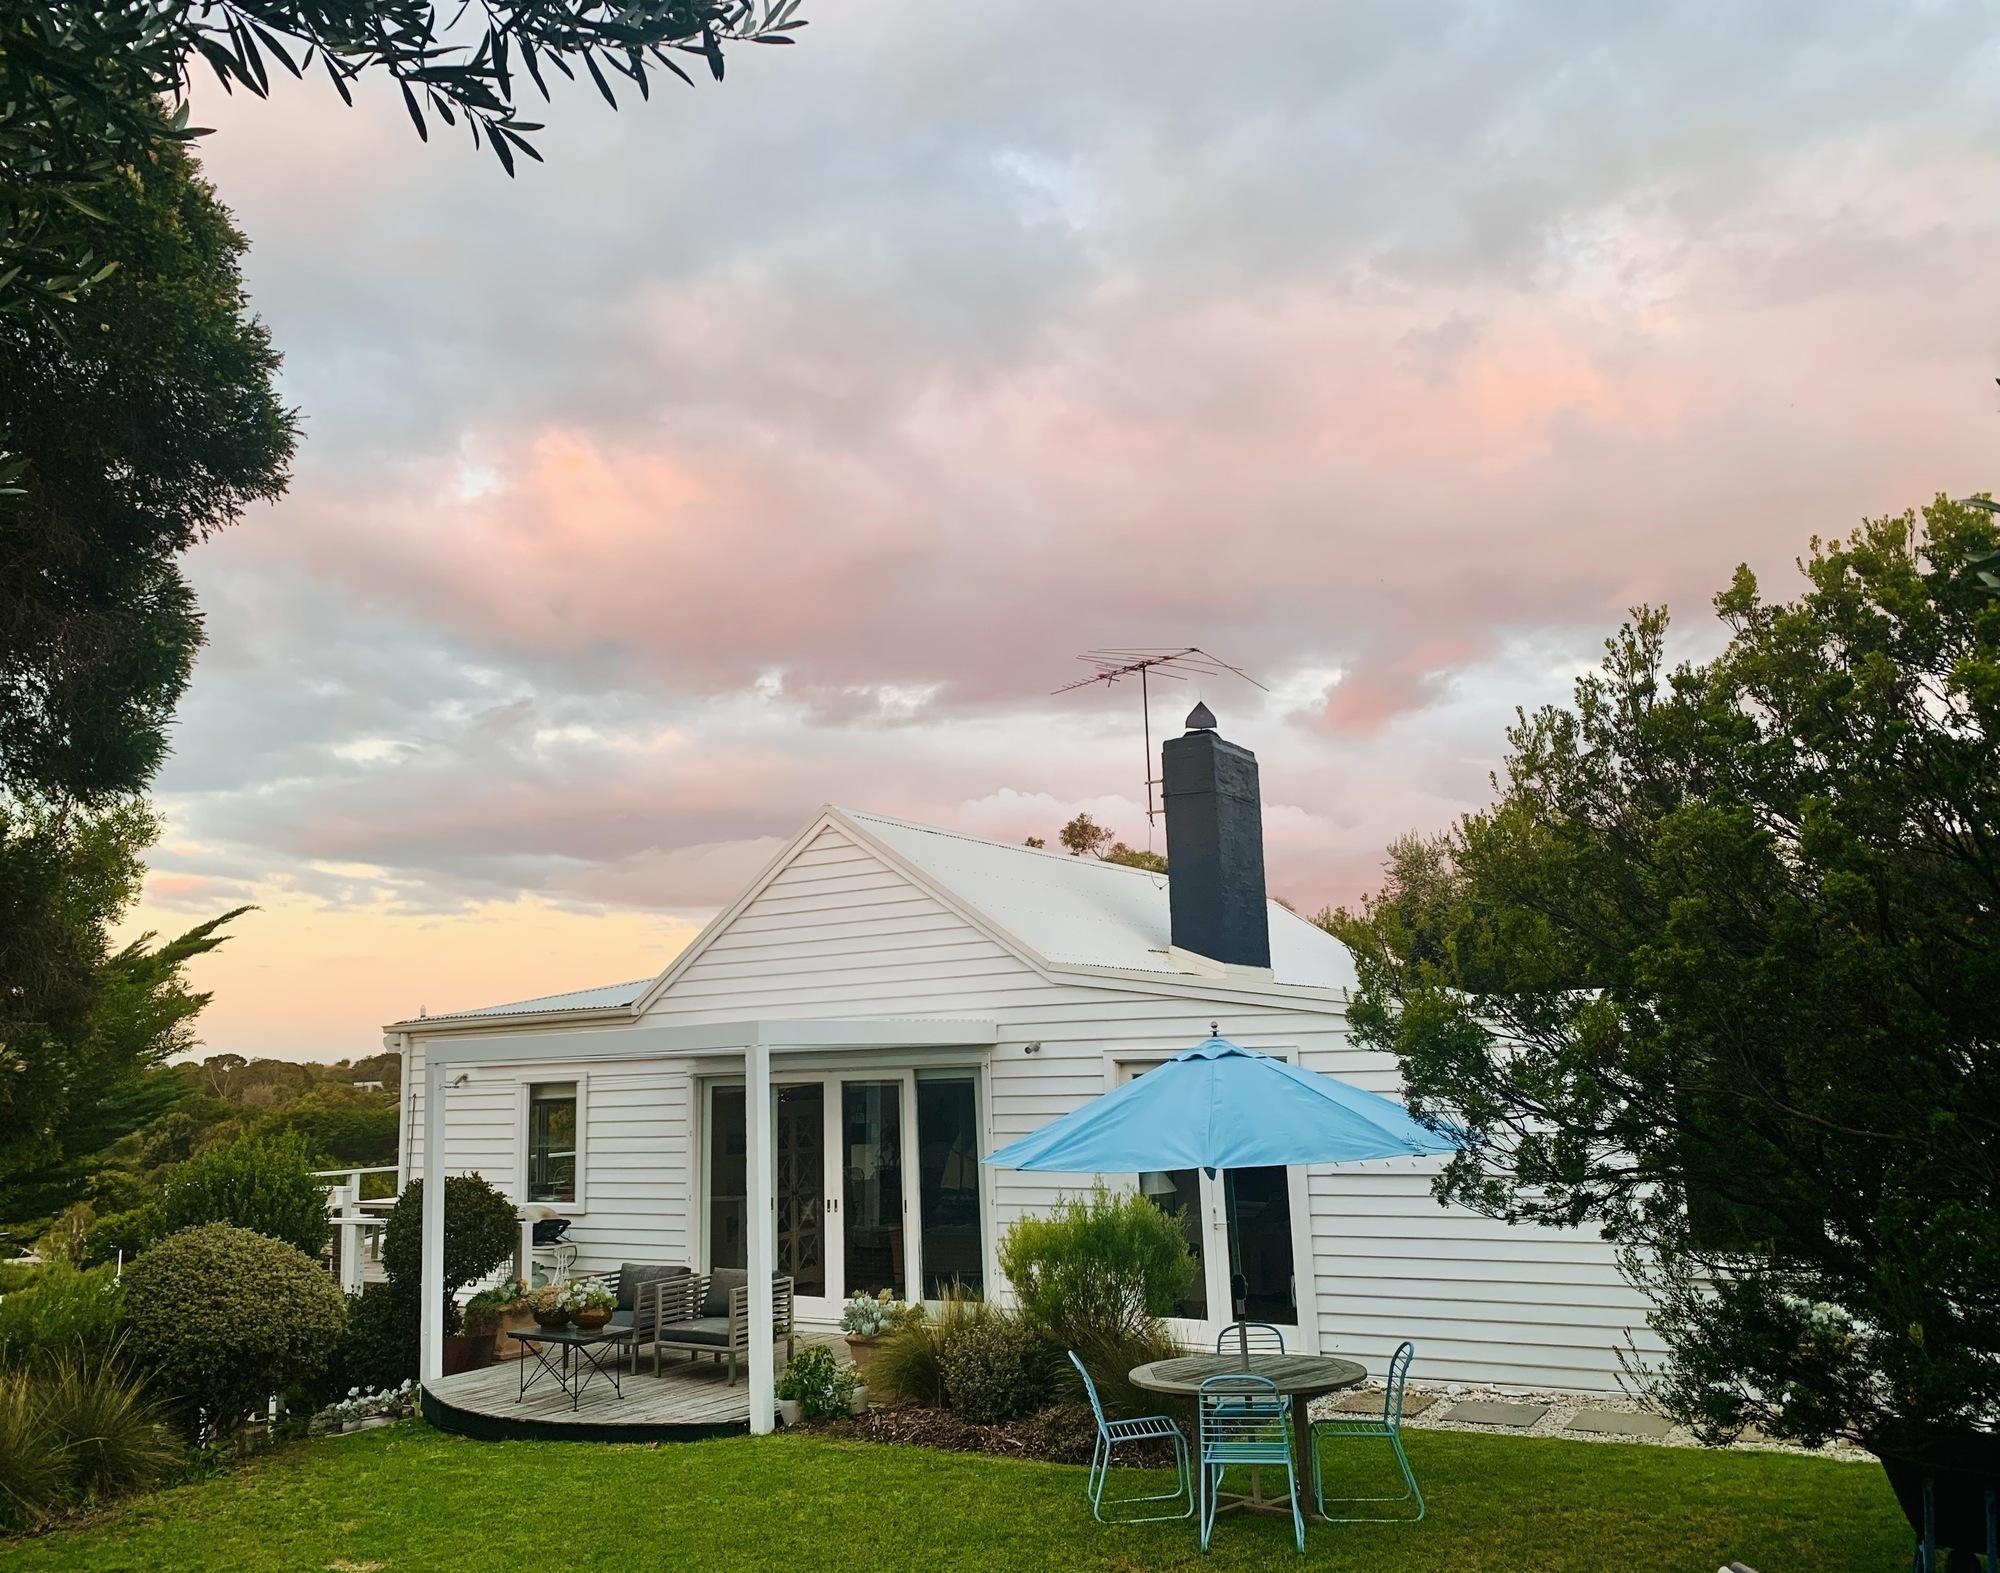 Nicole from Portsea, VIC loves COLORBOND® steel. Roofing, Guttering & Fascia made from COLORBOND® steel in colours Surfmist® and Surfmist® Matt